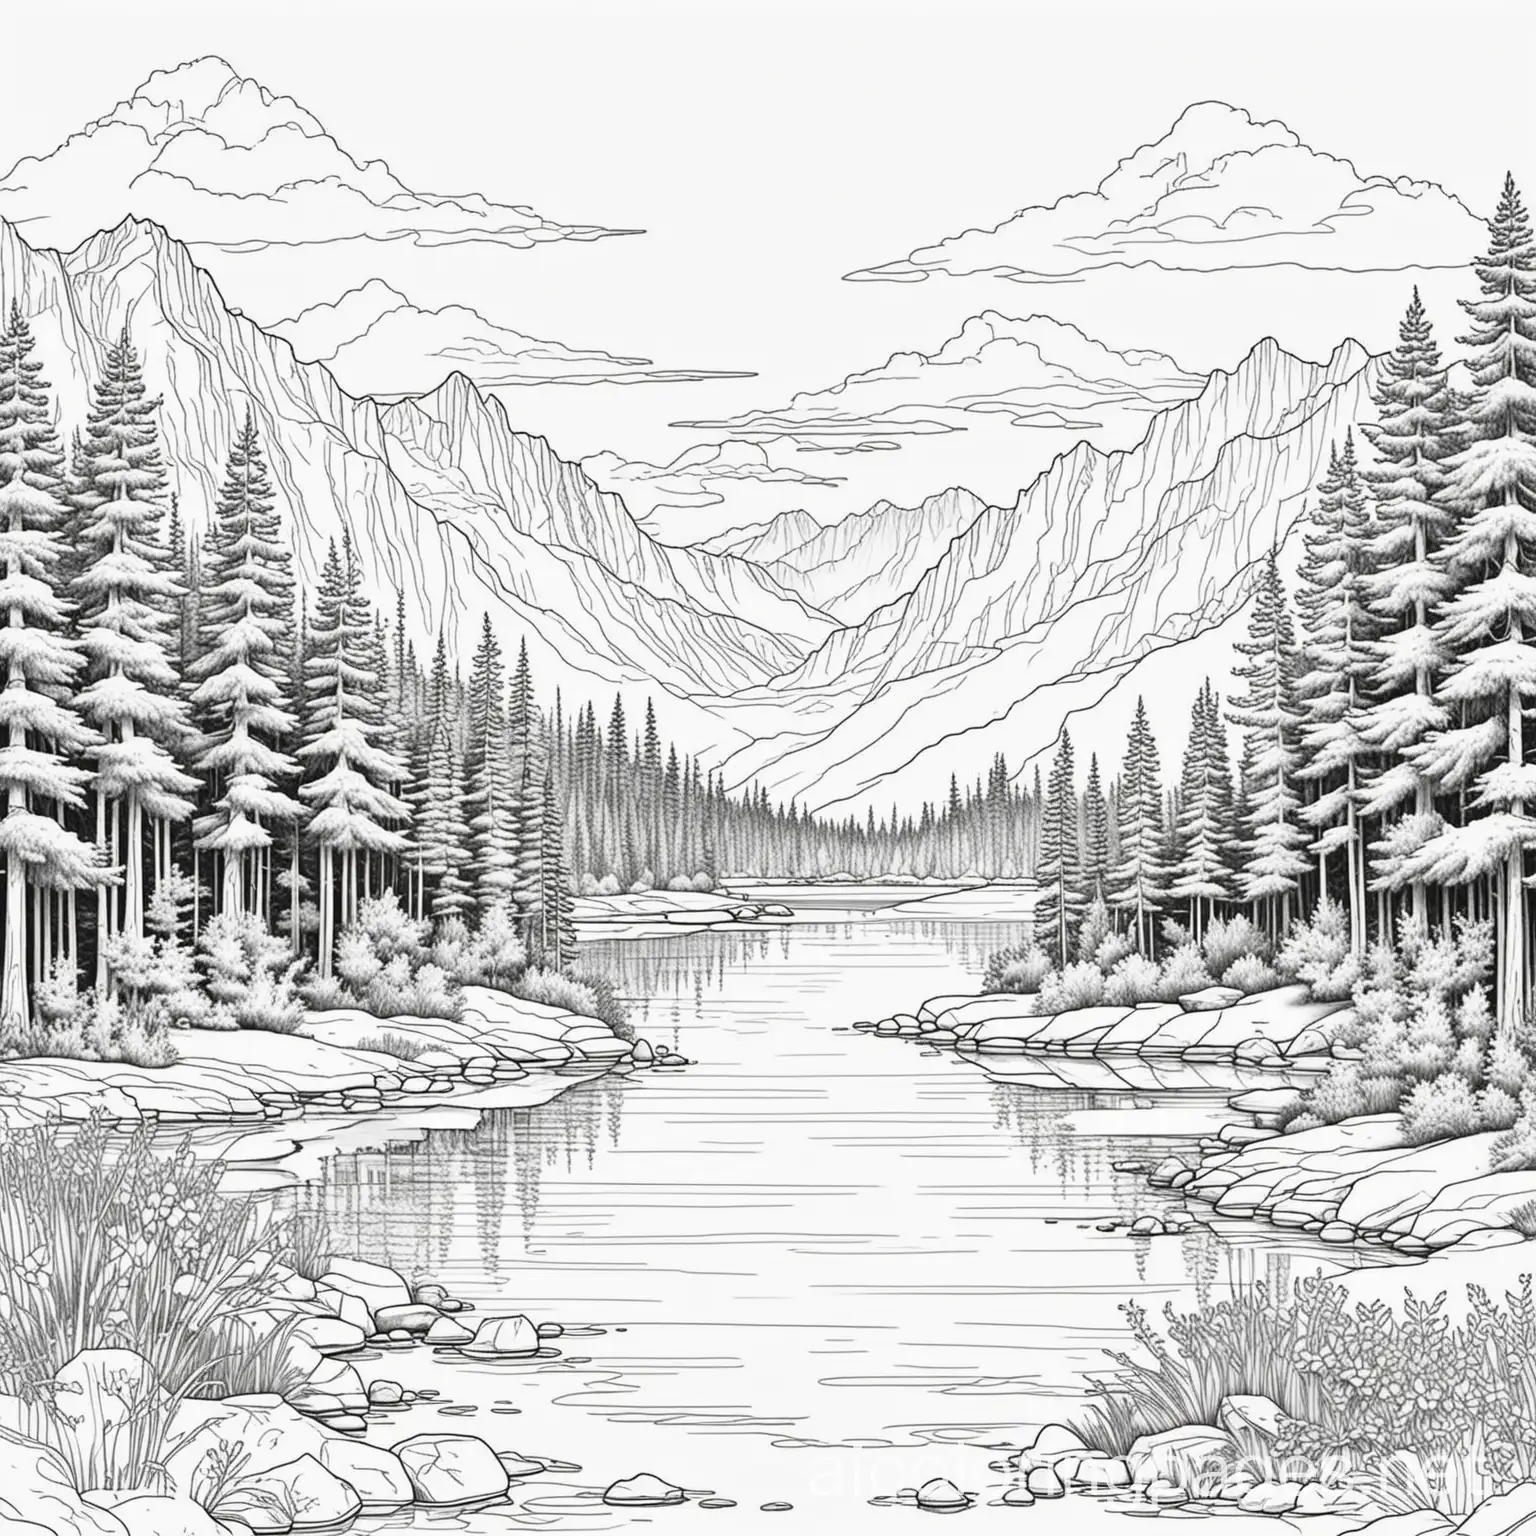 mountains trees lake, Coloring Page, black and white, line art, white background, Simplicity, Ample White Space. The background of the coloring page is plain white to make it easy for young children to color within the lines. The outlines of all the subjects are easy to distinguish, making it simple for kids to color without too much difficulty